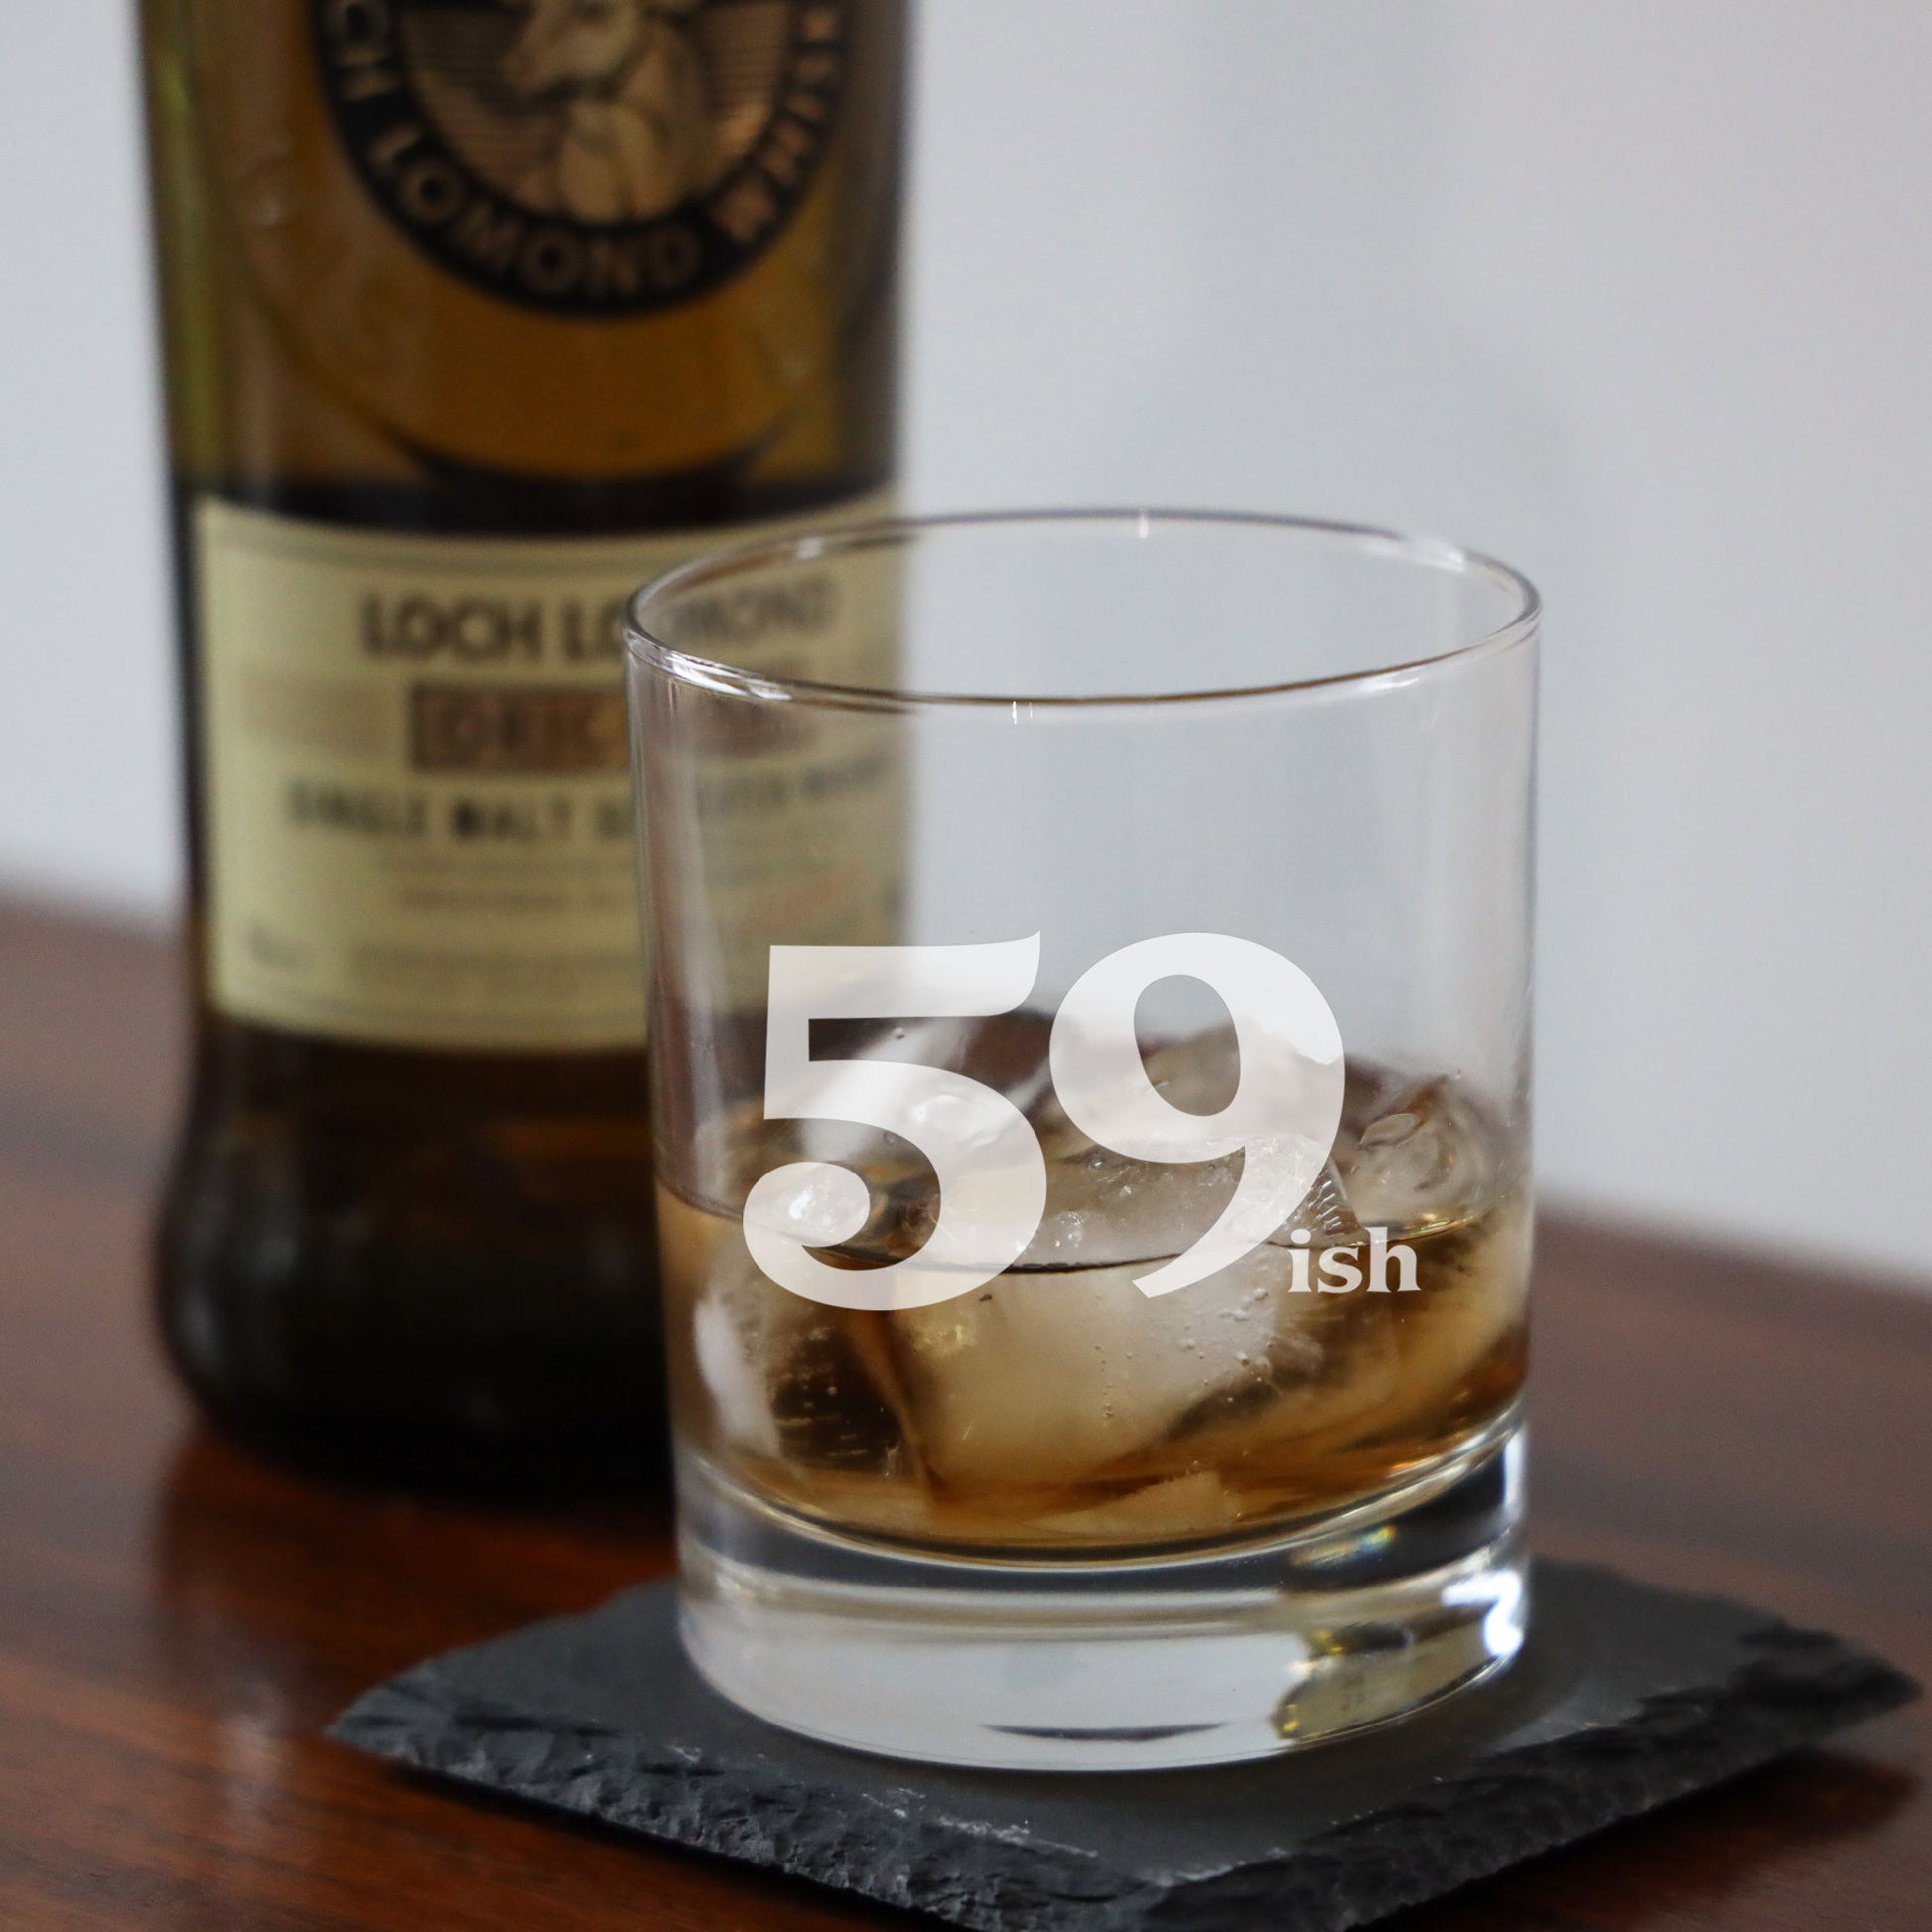 59ish Whisky Glass and/or Coaster Set  - Always Looking Good -   